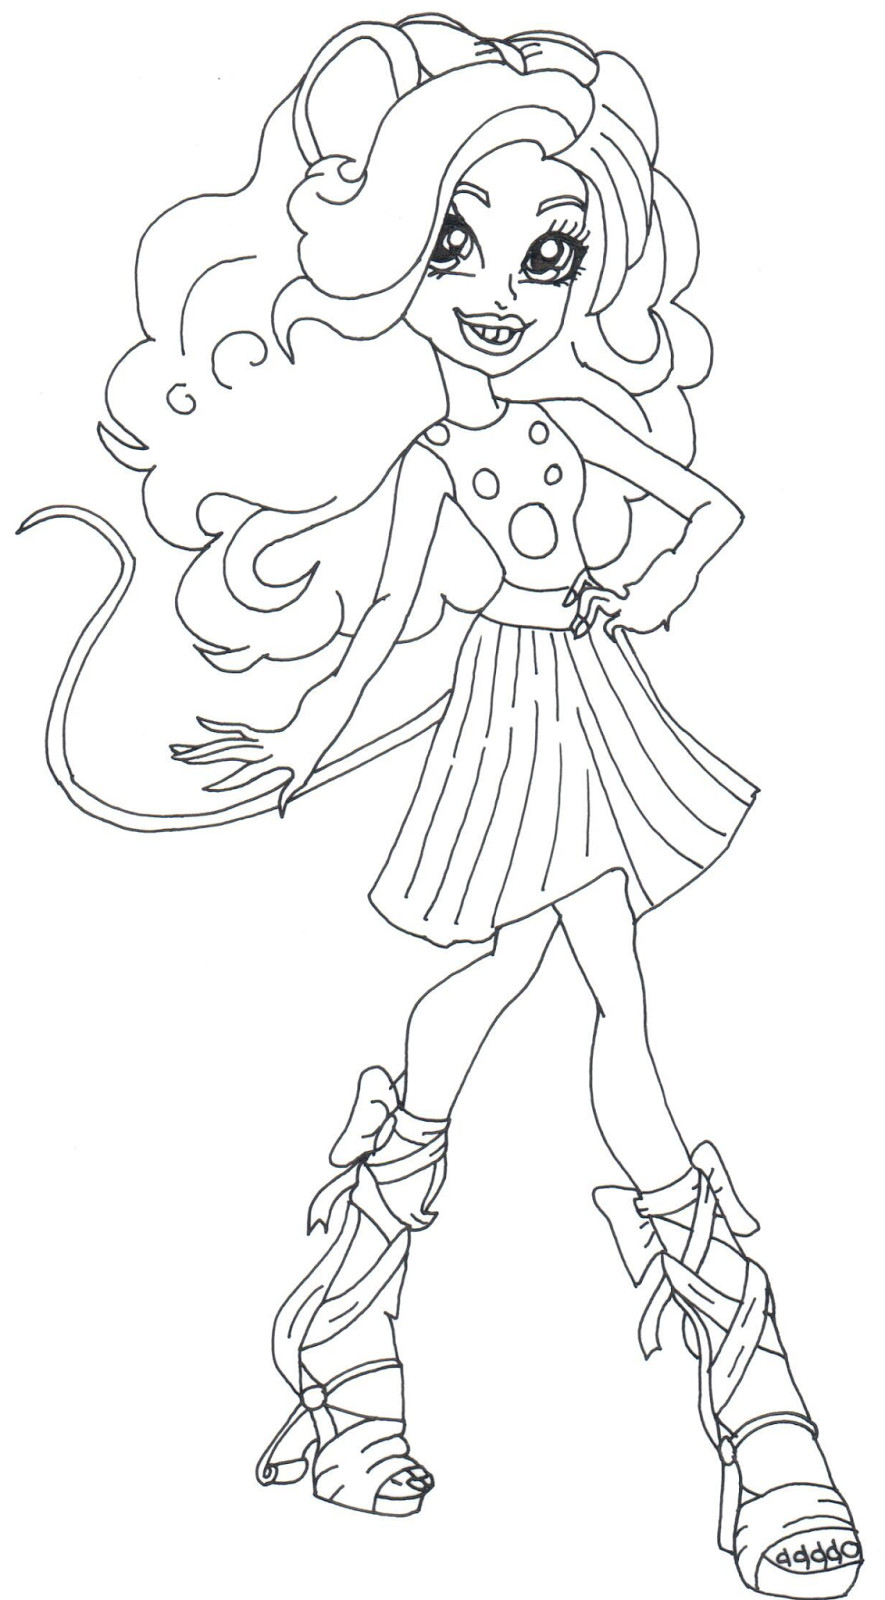 Free Printable Monster High Coloring Pages
 Free Printable Monster High Coloring Pages October 2015